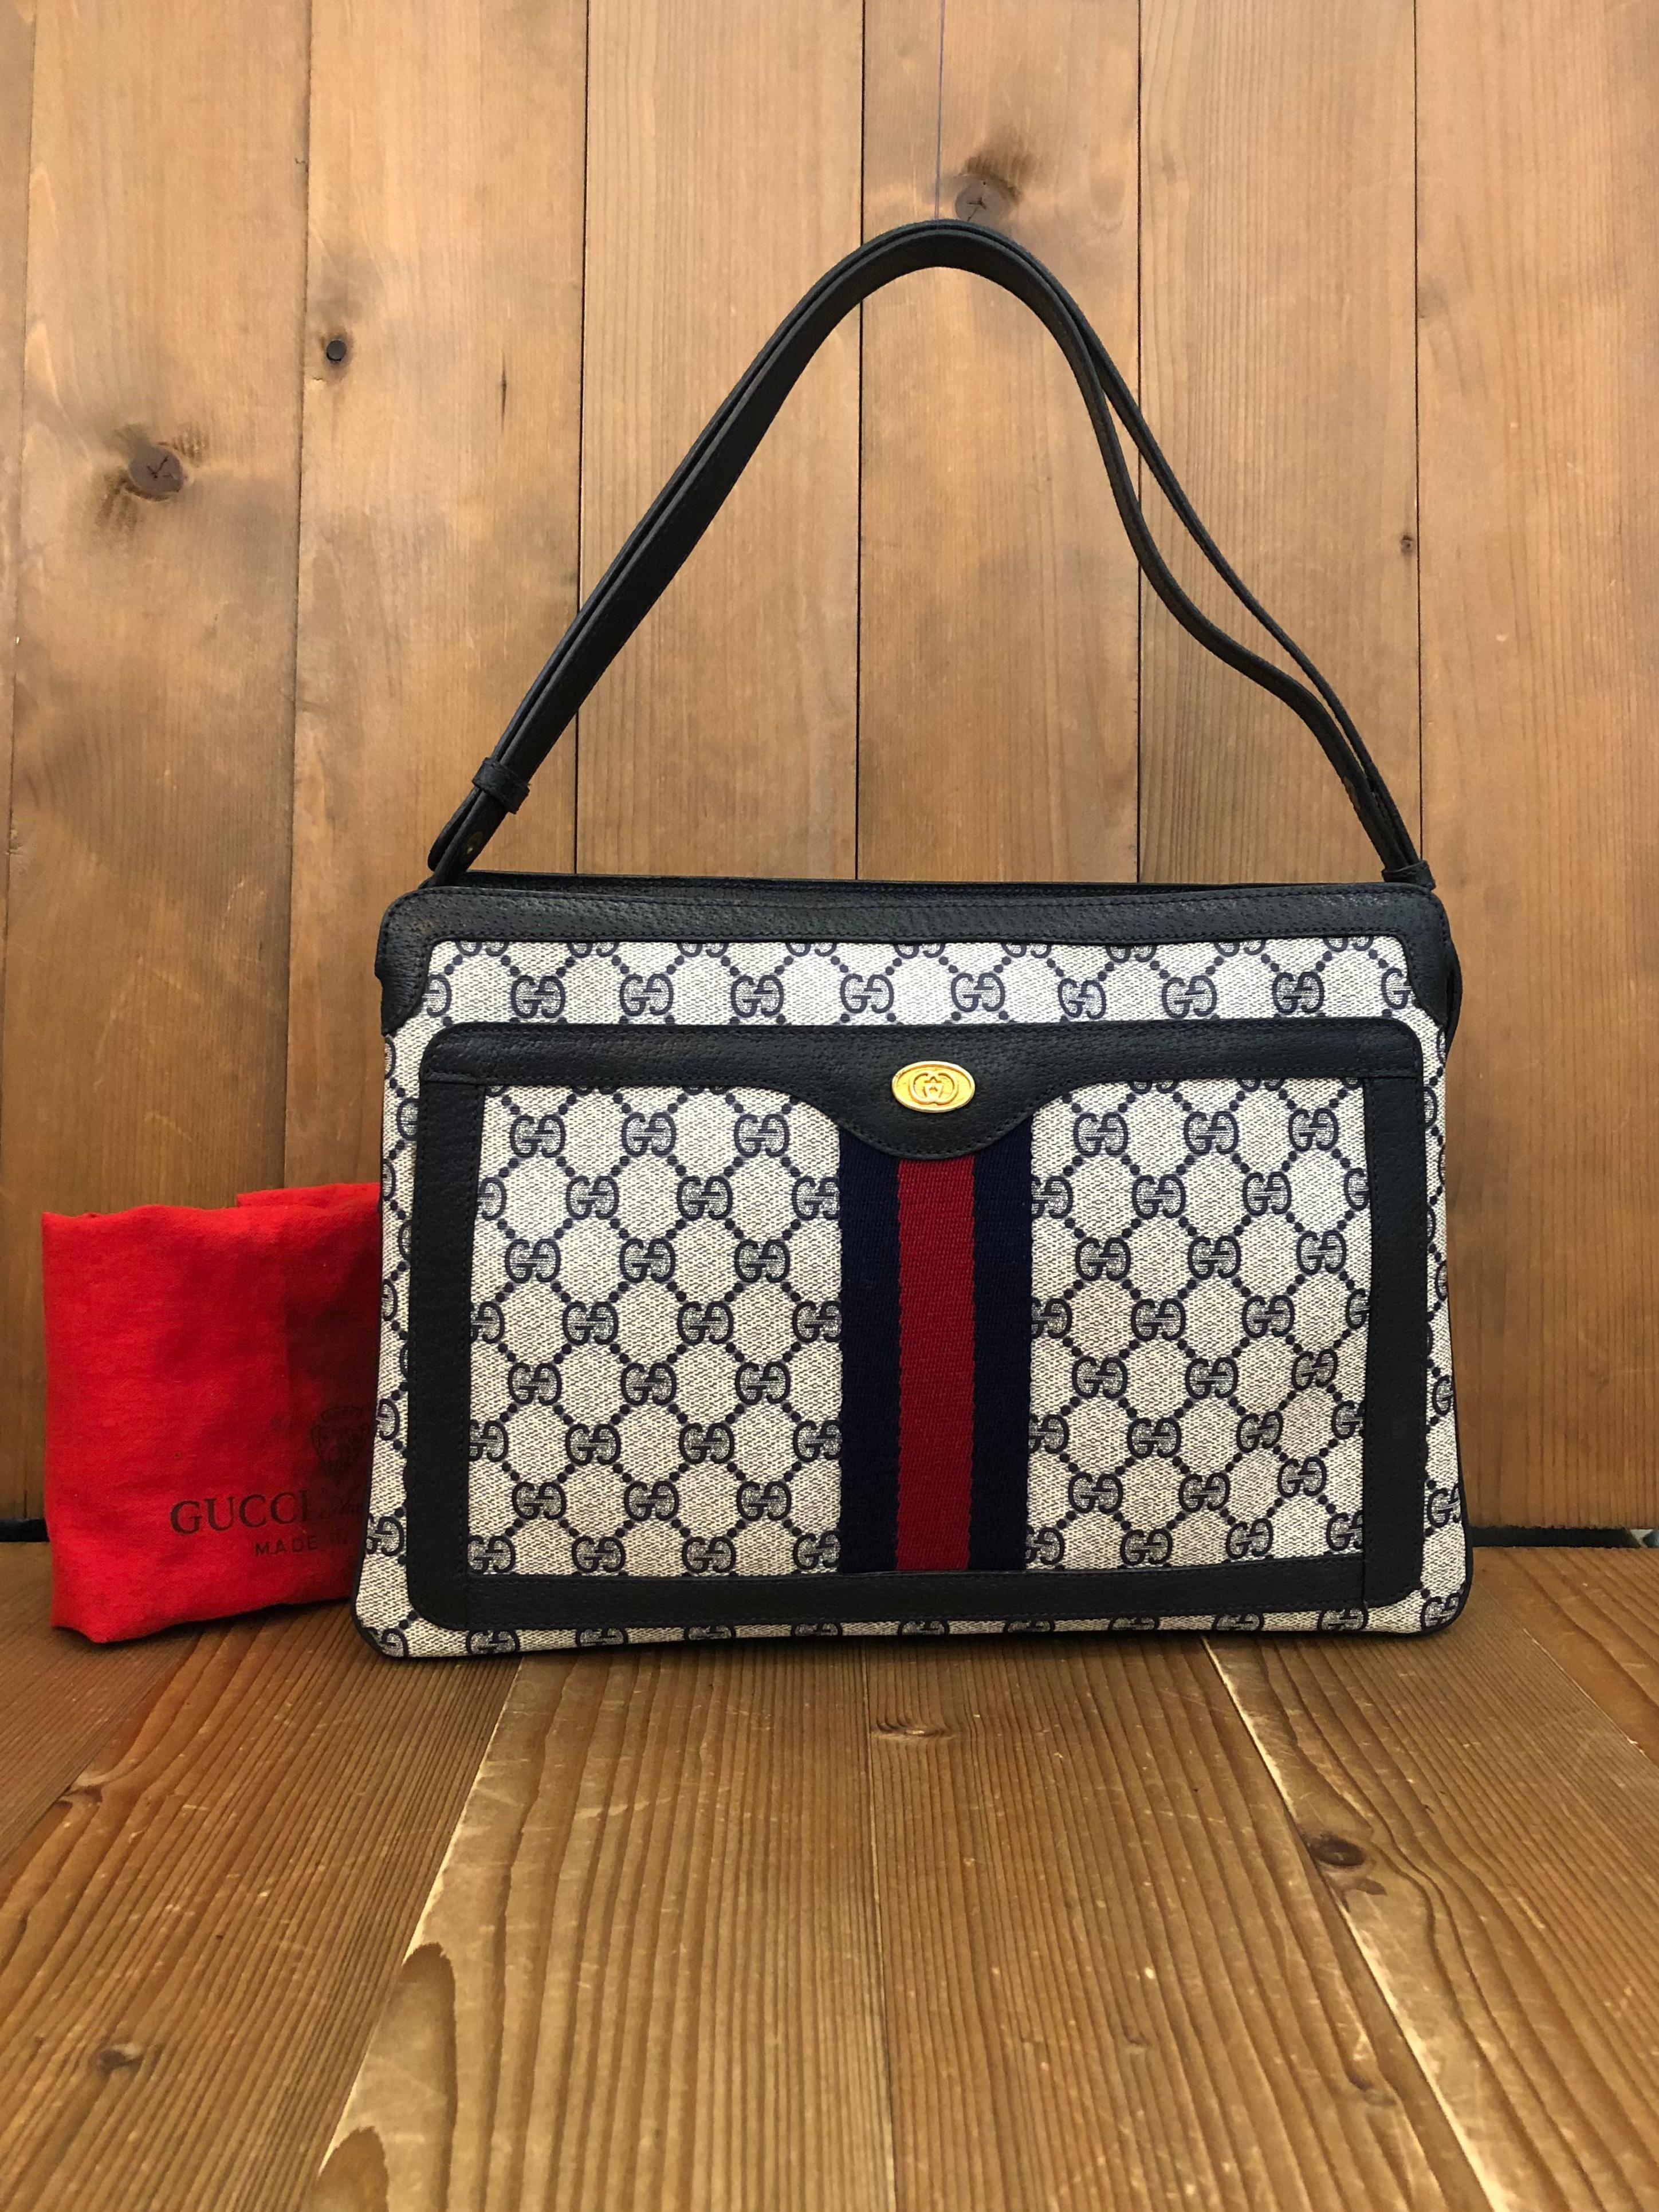 This vintage GUCCI web shoulder bag from the 1980s is crafted of navy monogram canvas and leather in navy featuring Guccis iconic navy/red web. This shoulder bag features three main compartments with one front open pocket and one interior zip